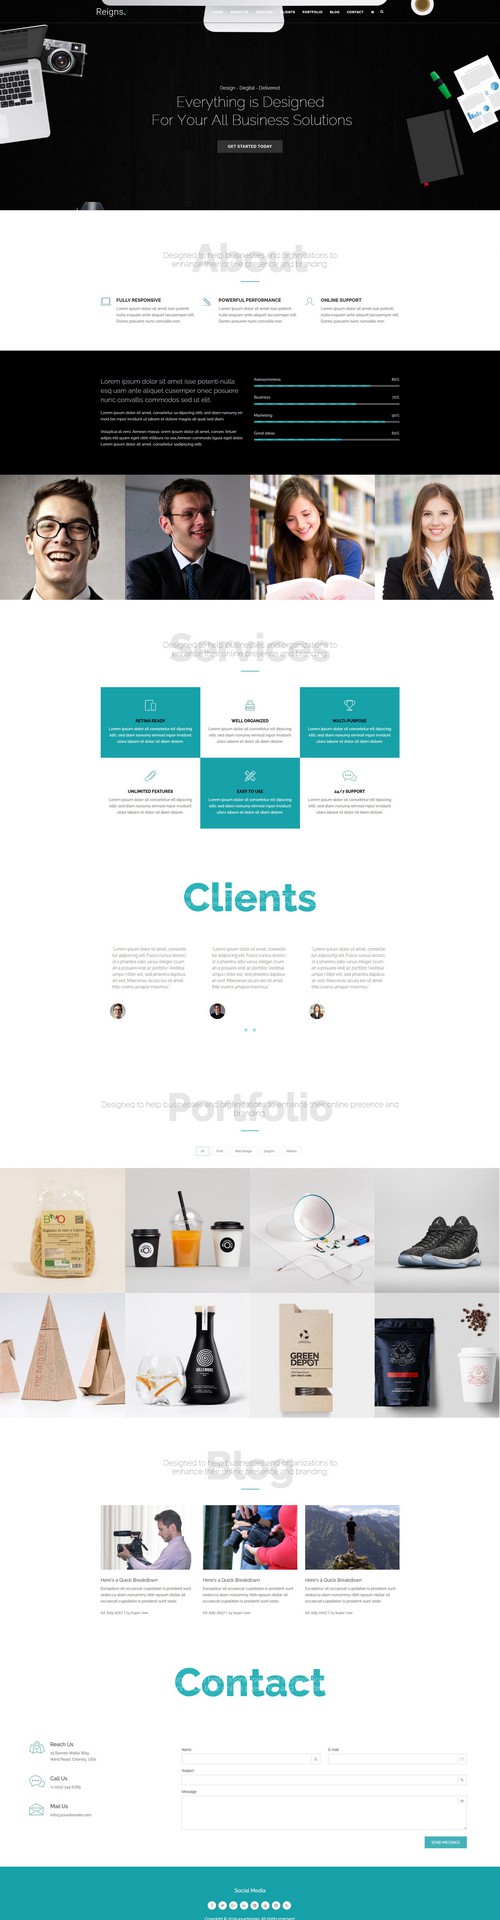 Reigns - Professional One Page Joomla Template